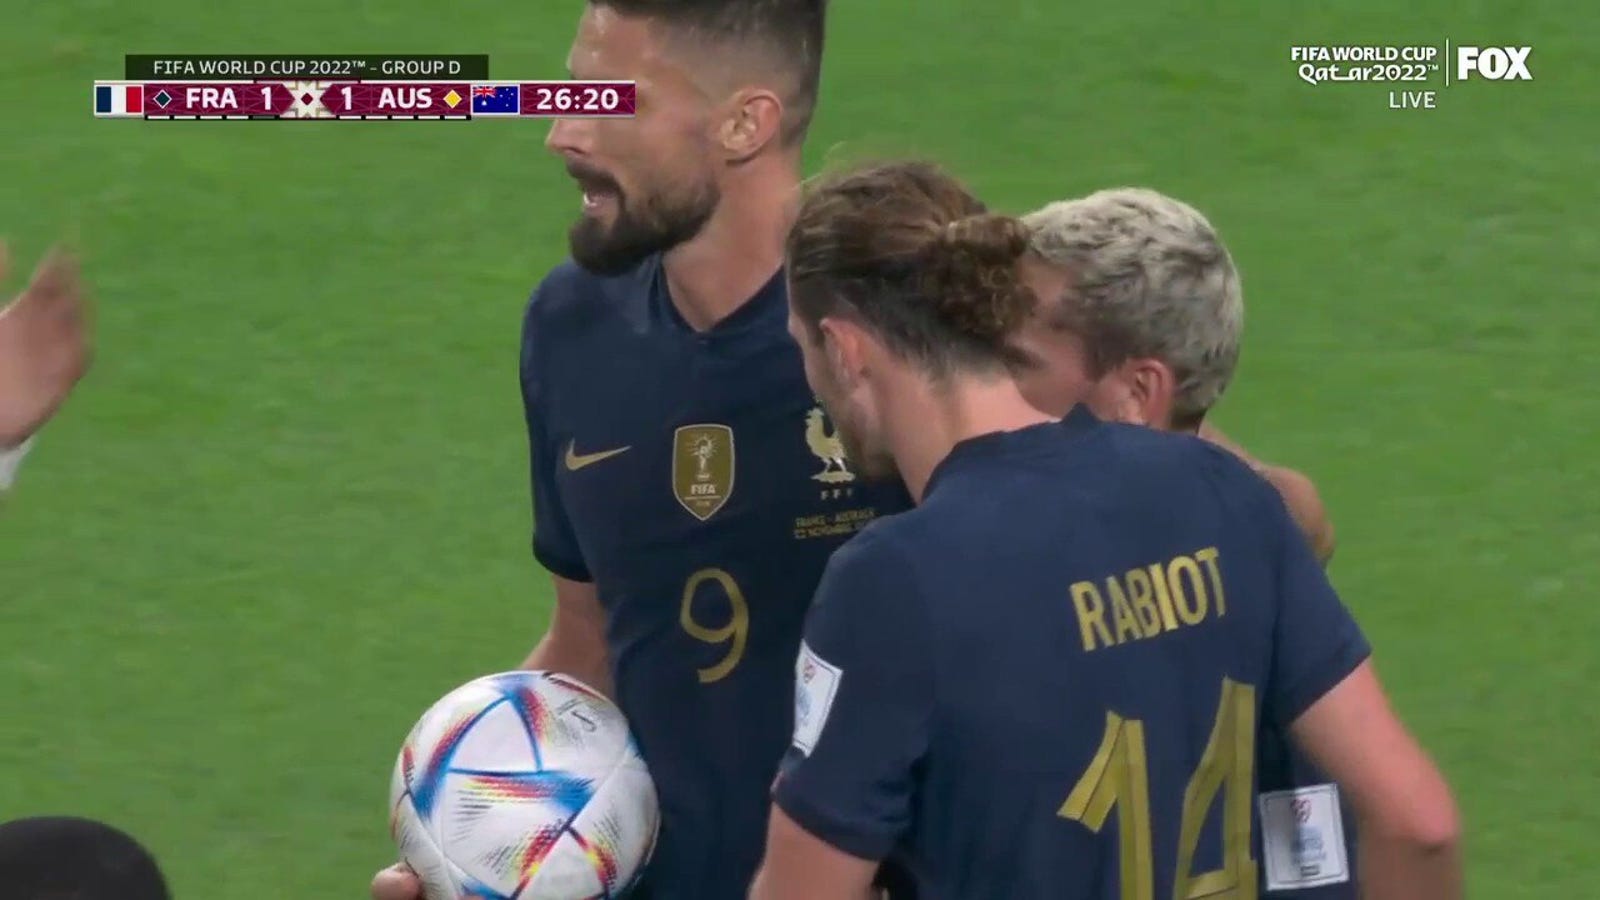 France's Adrien Rabiot scores a goal against Australia in 27 minutes  World Cup 2022